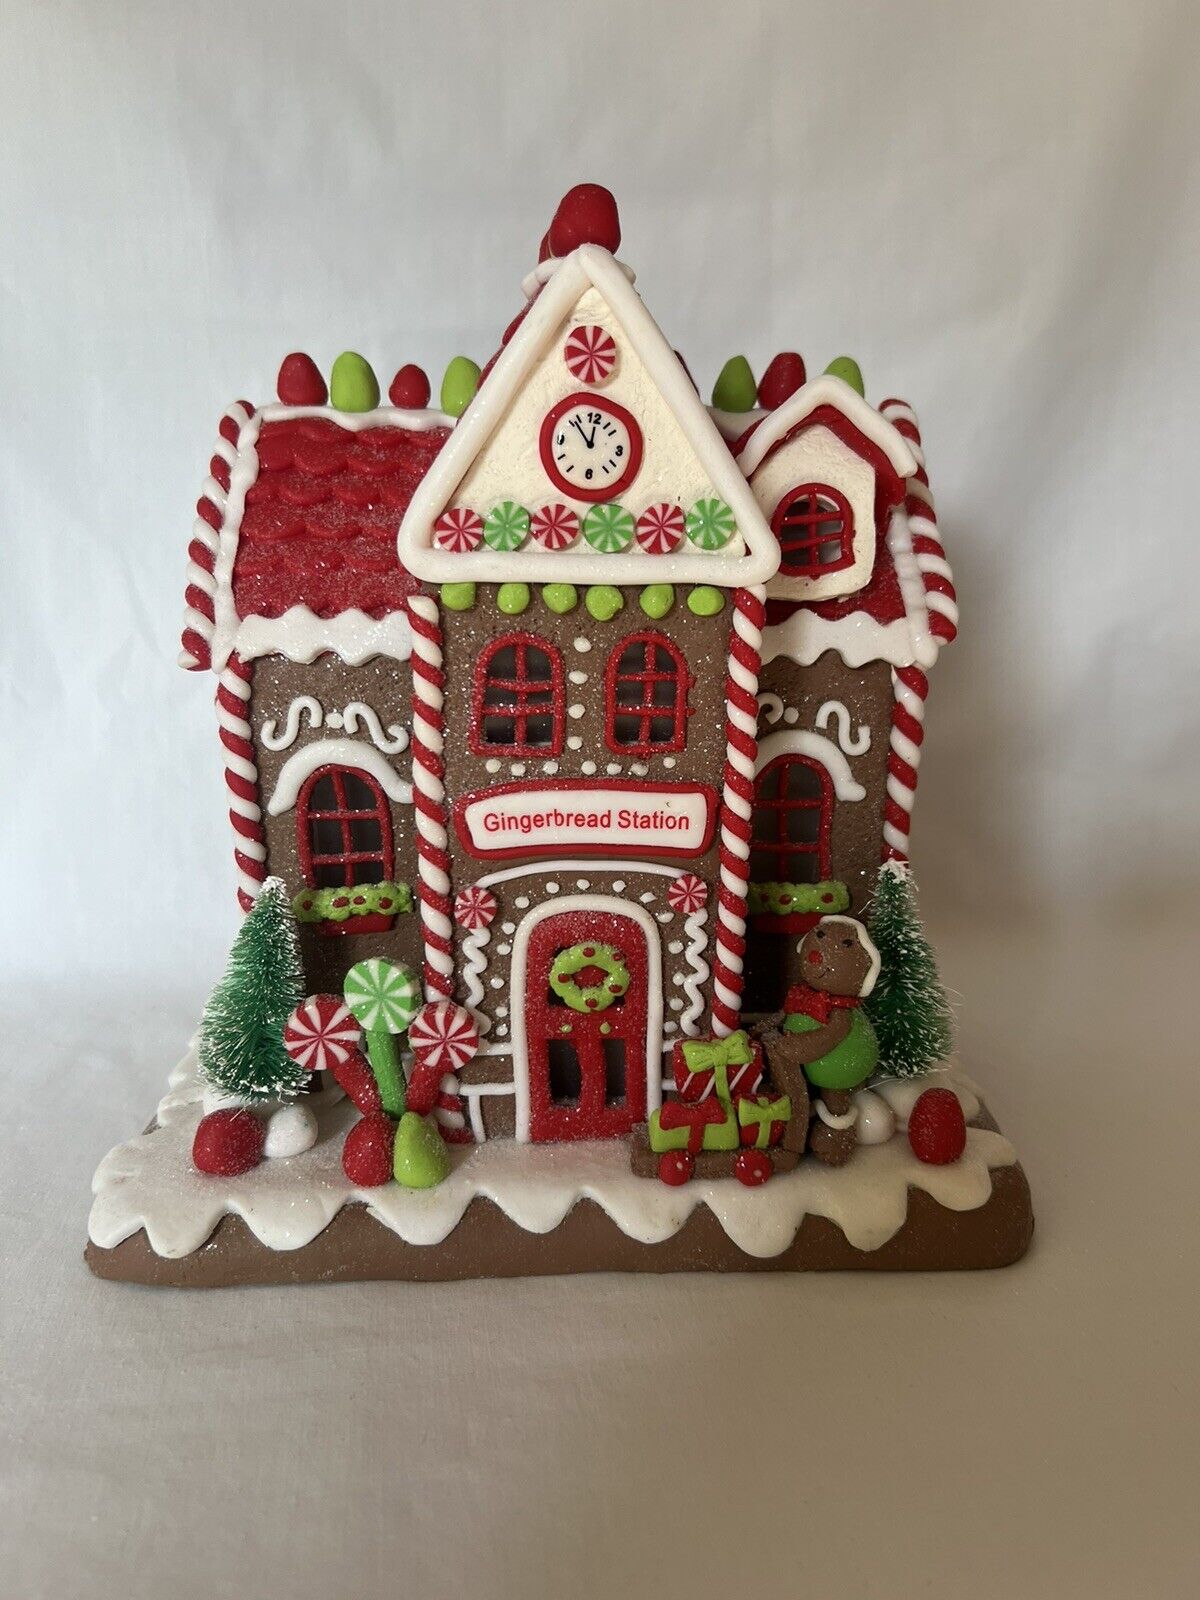 QVC Valerie Parr Hill 9” Illuminated Gingerbread Station House 